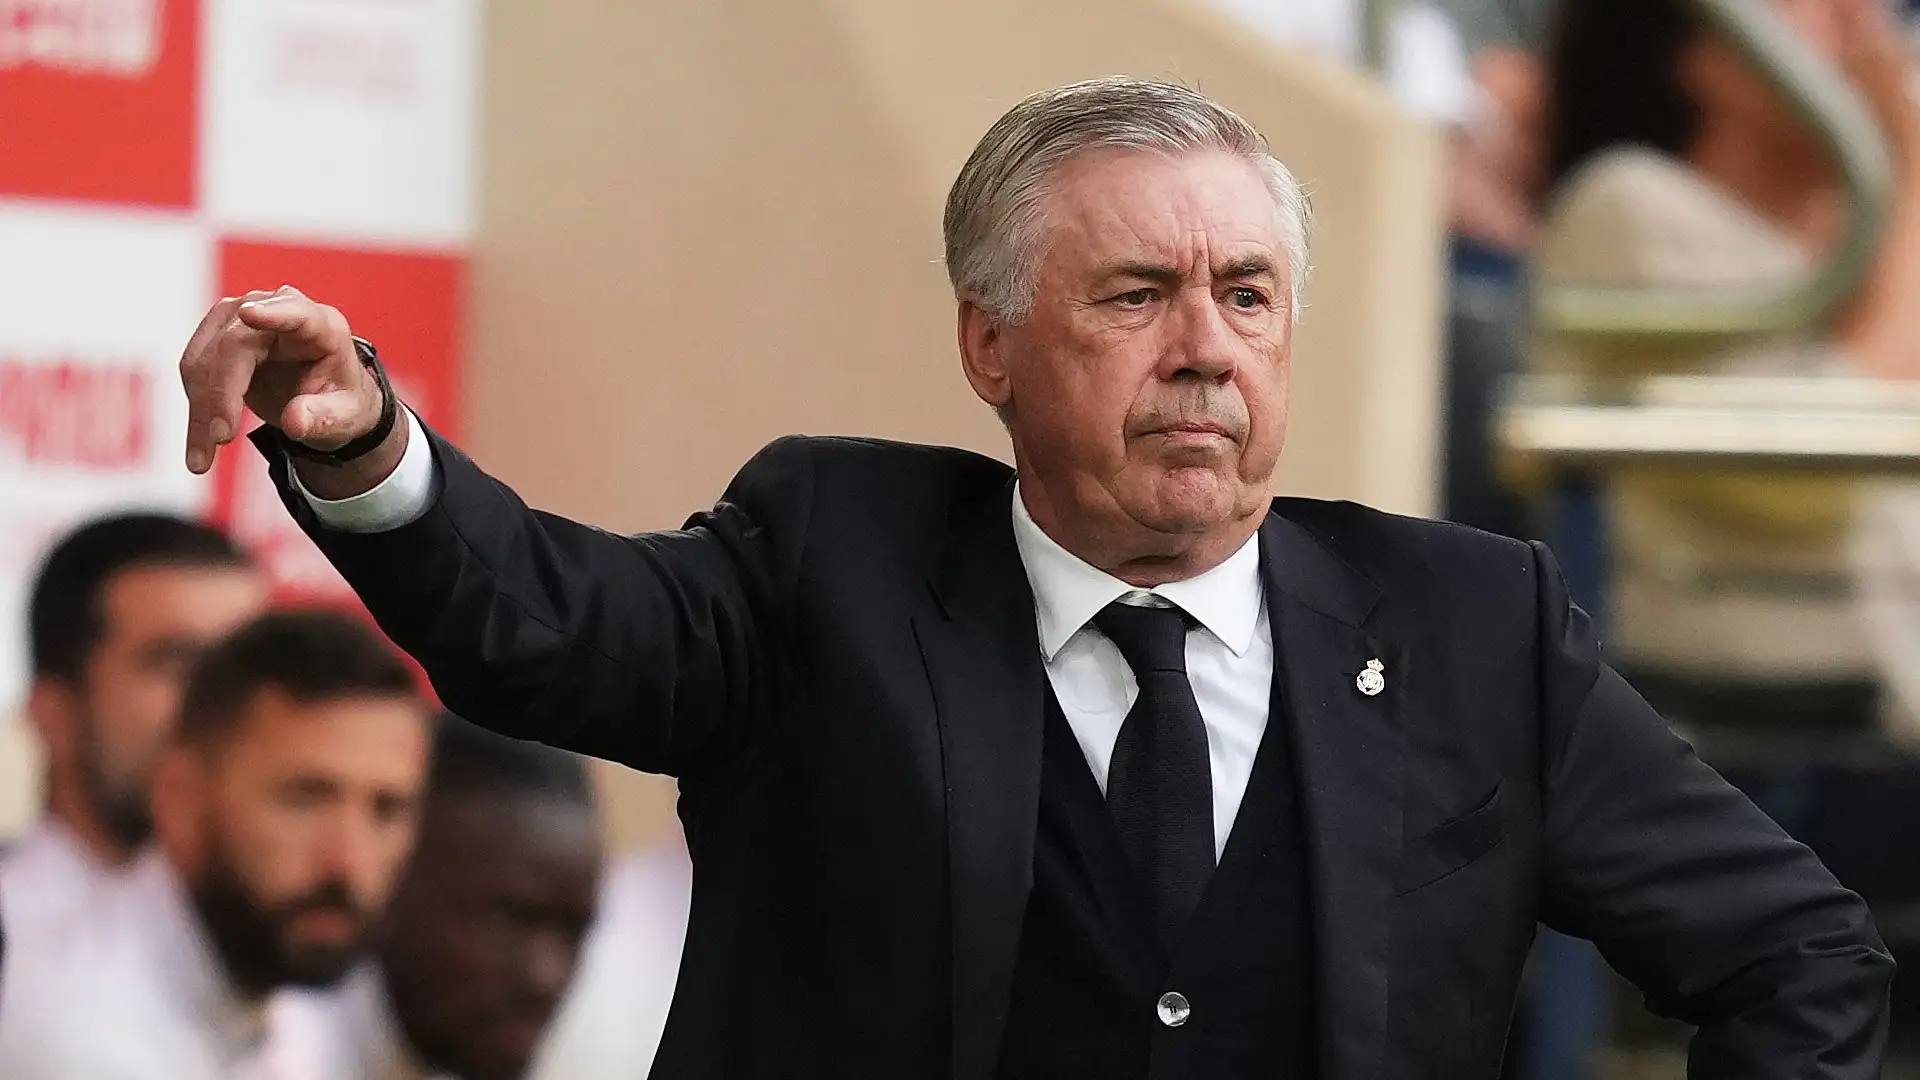 'Salmon, pasta and a nap' - Carlo Ancelotti reveals his pre-Champions League final routine as Real Madrid boss admits how high his heart rate gets ahead of big showdown